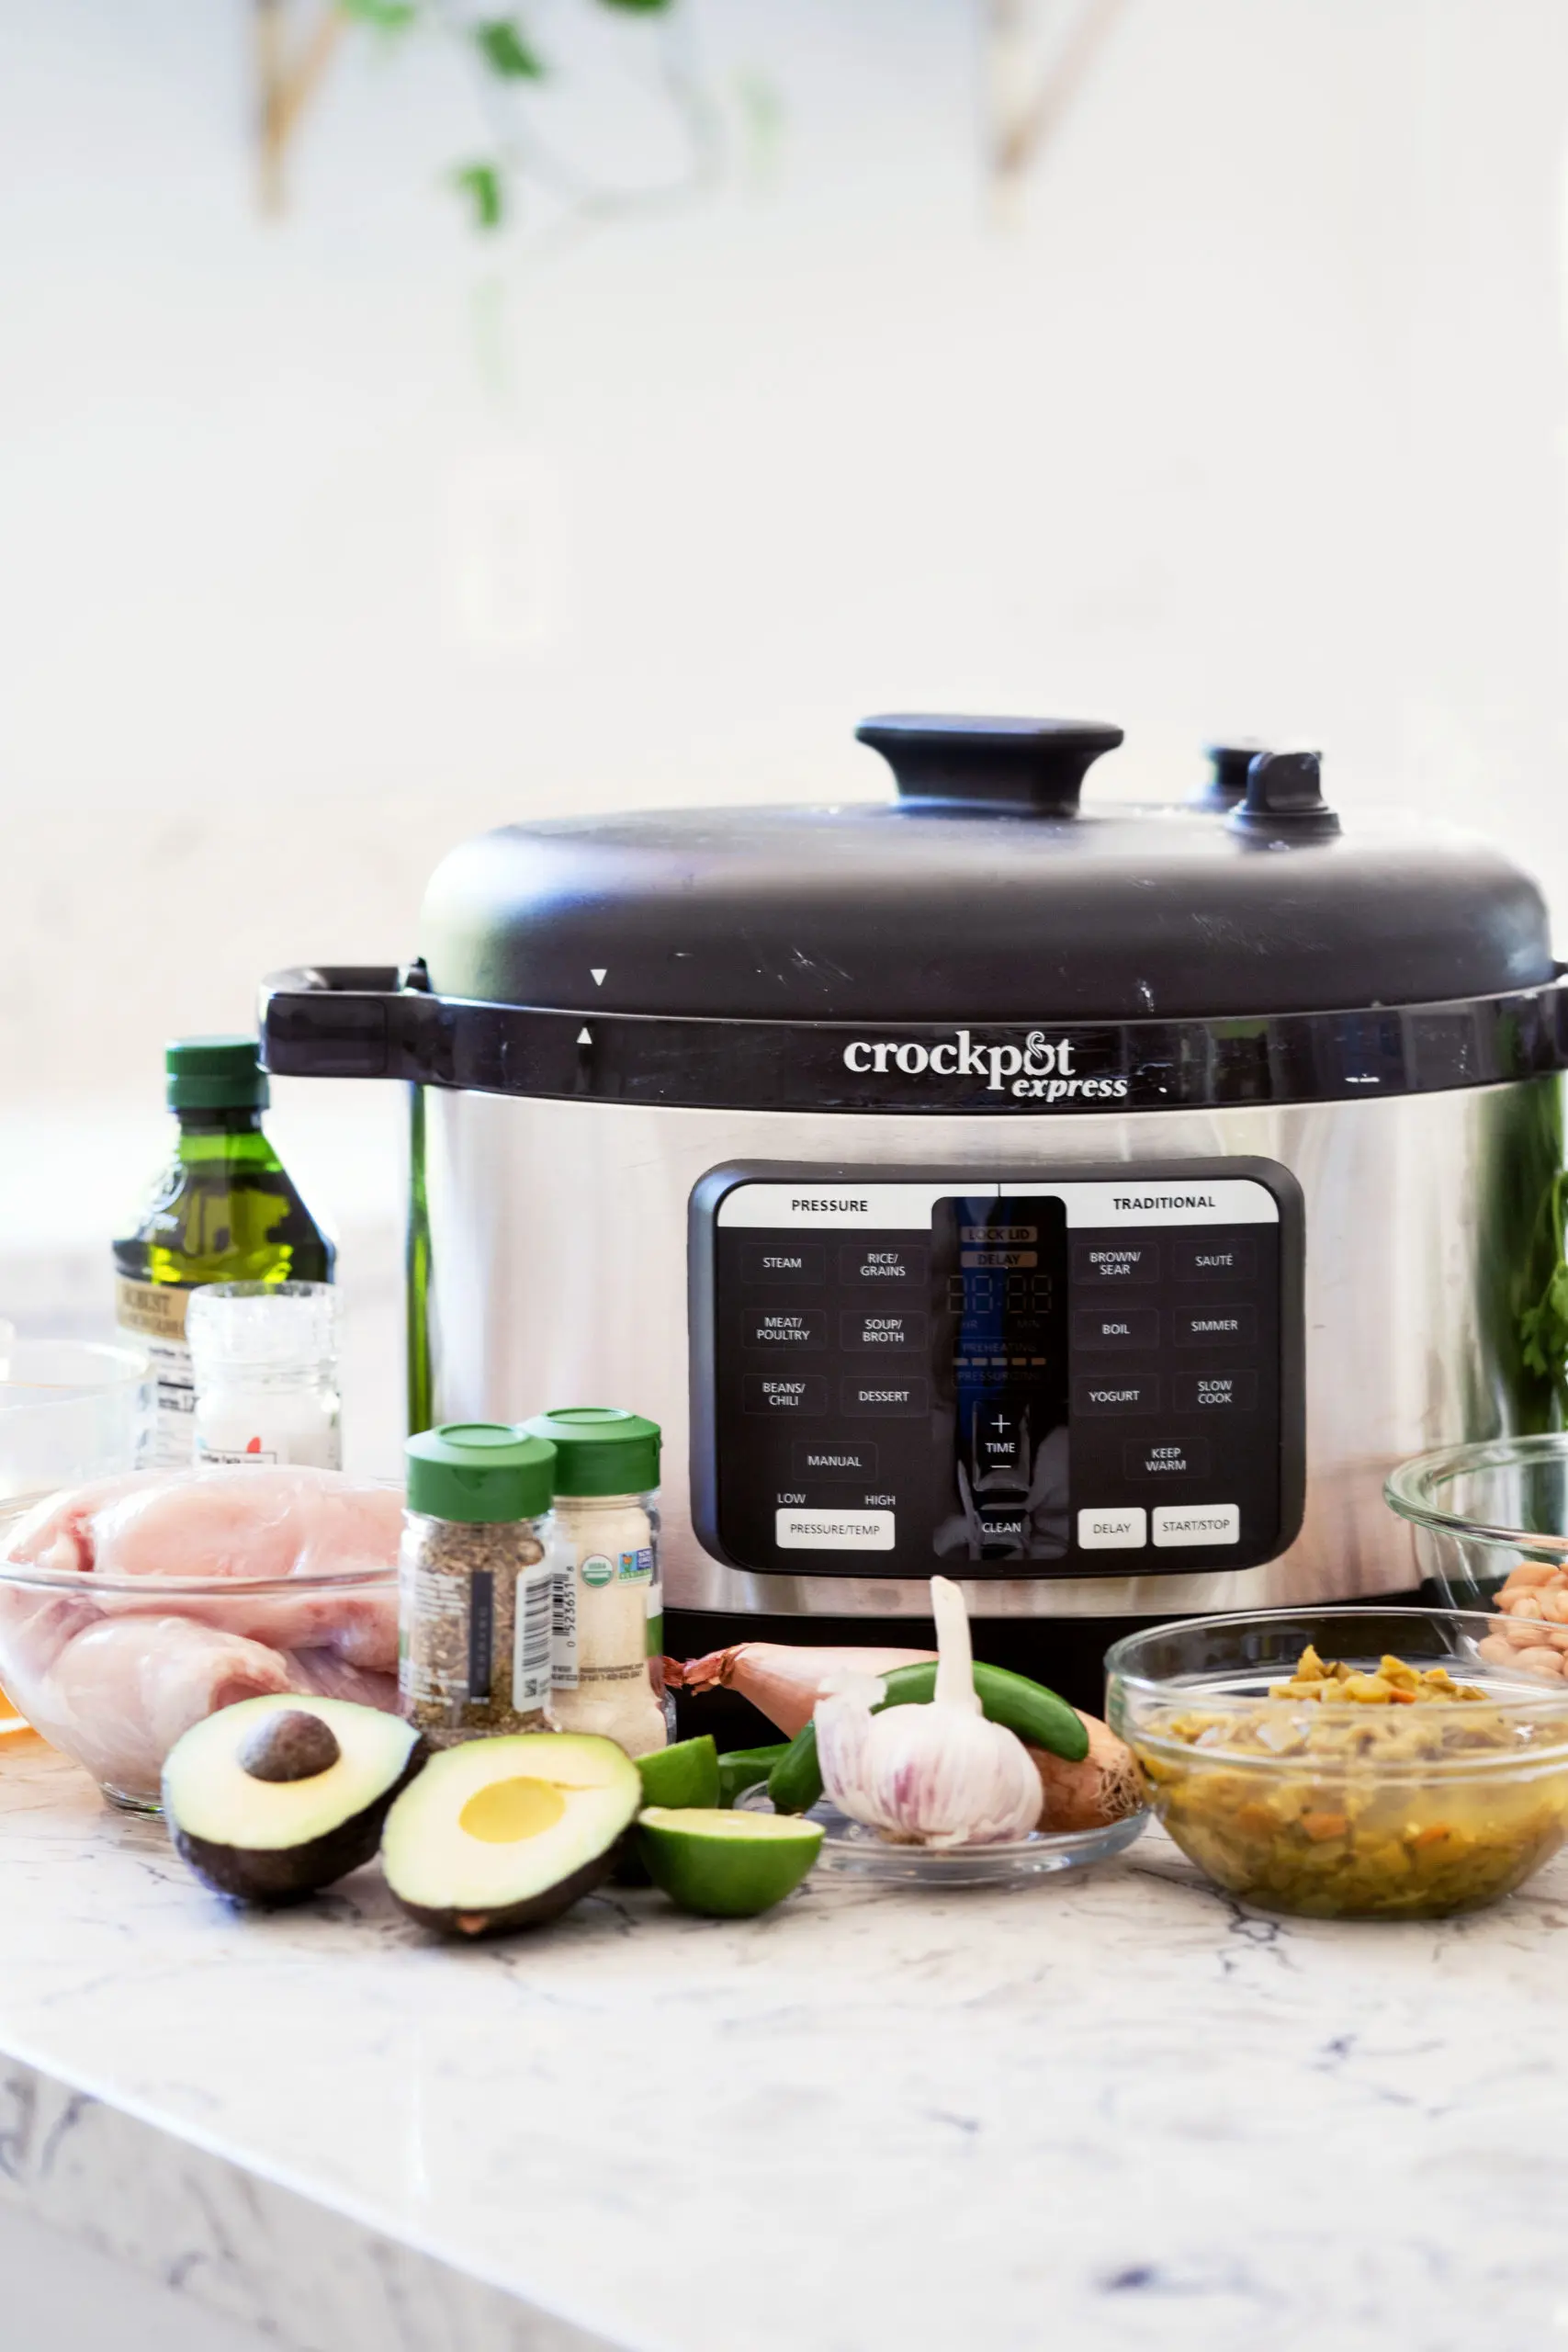 The Crock-Pot Express Will Cook Meals In 30 Minutes